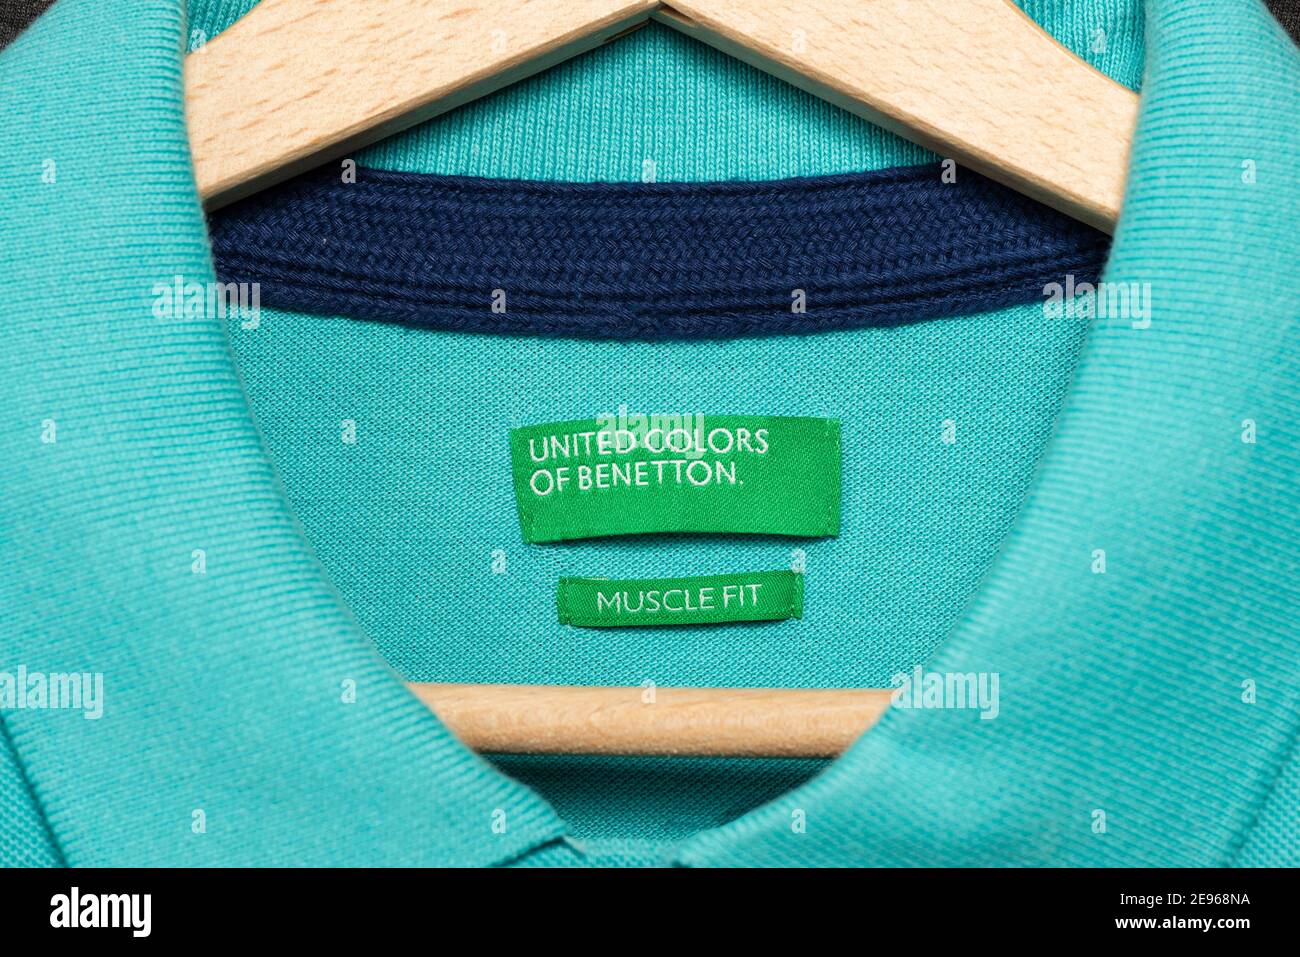 Fit United of Benetton - wooden tee Colors teal green label on on shirt Photo Stock Muscle hanging hanger Alamy